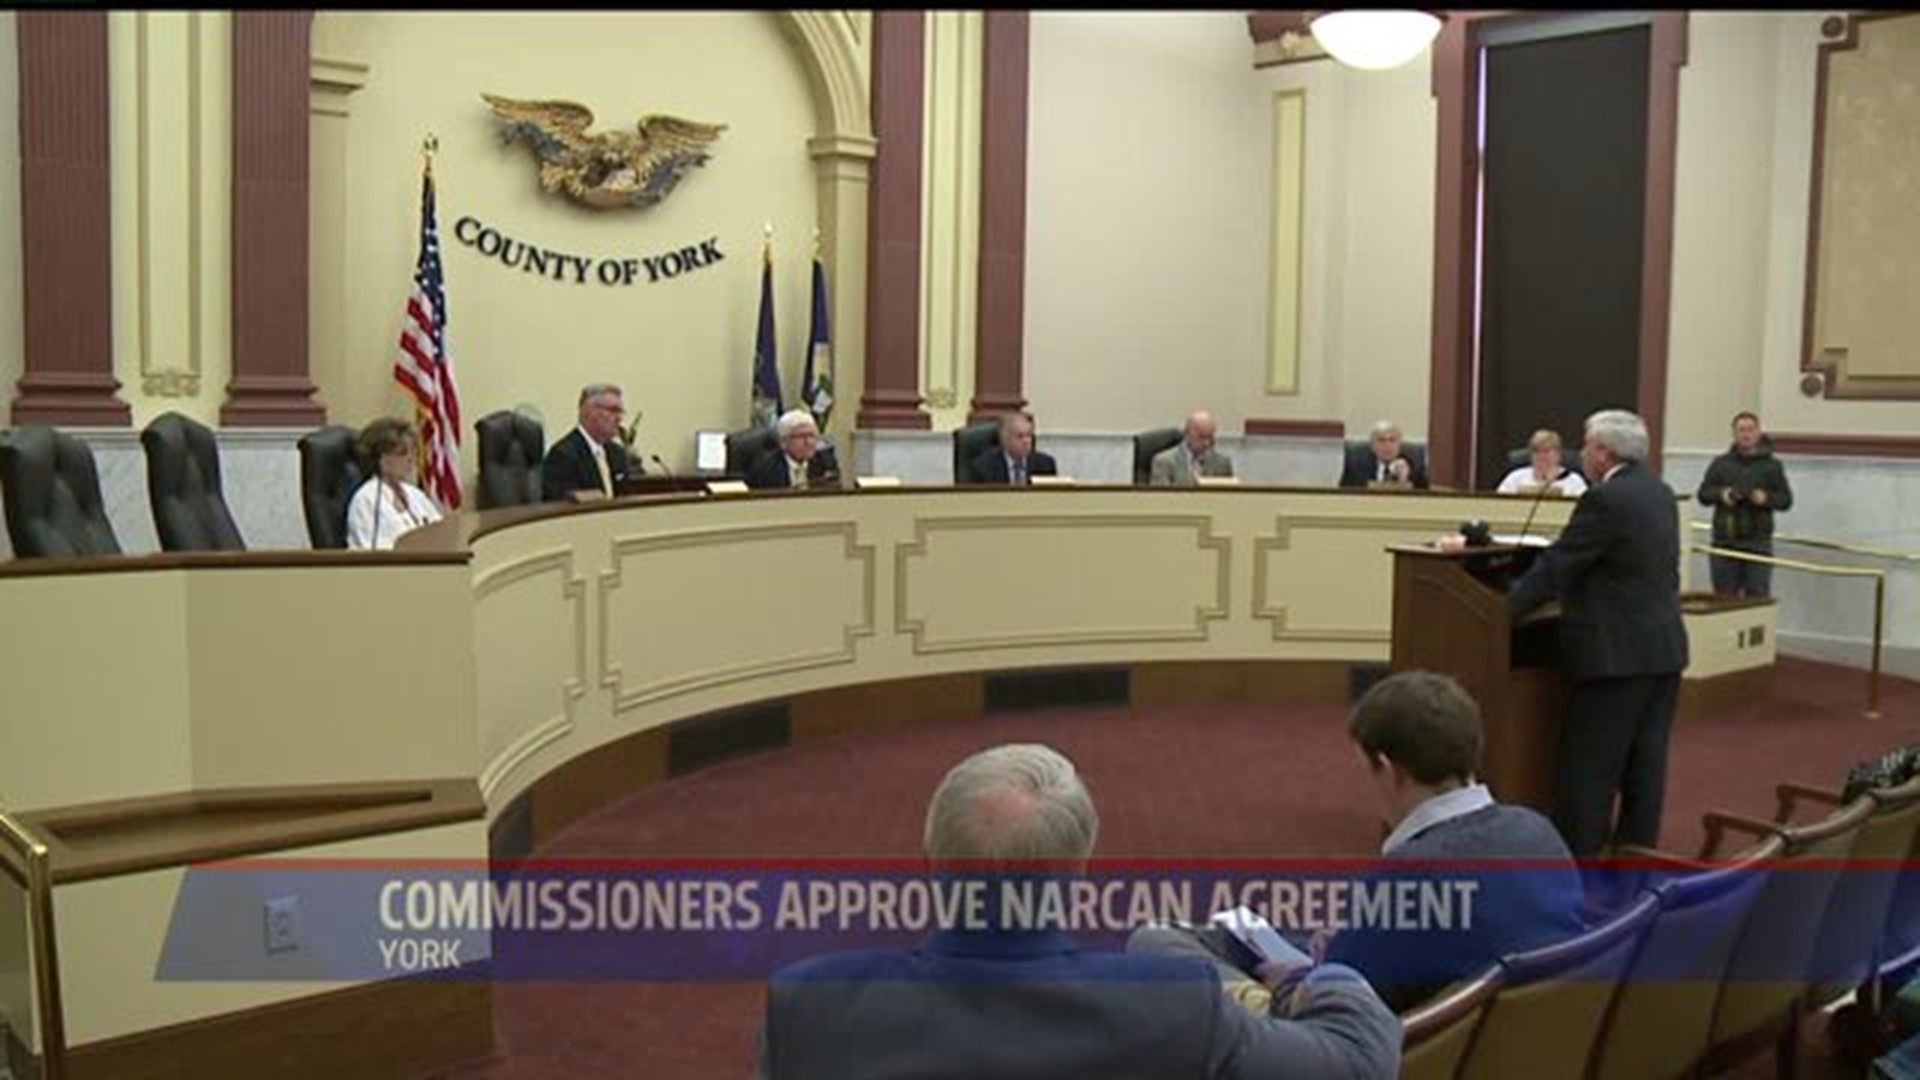 York County commissioners approve Narcan agreement